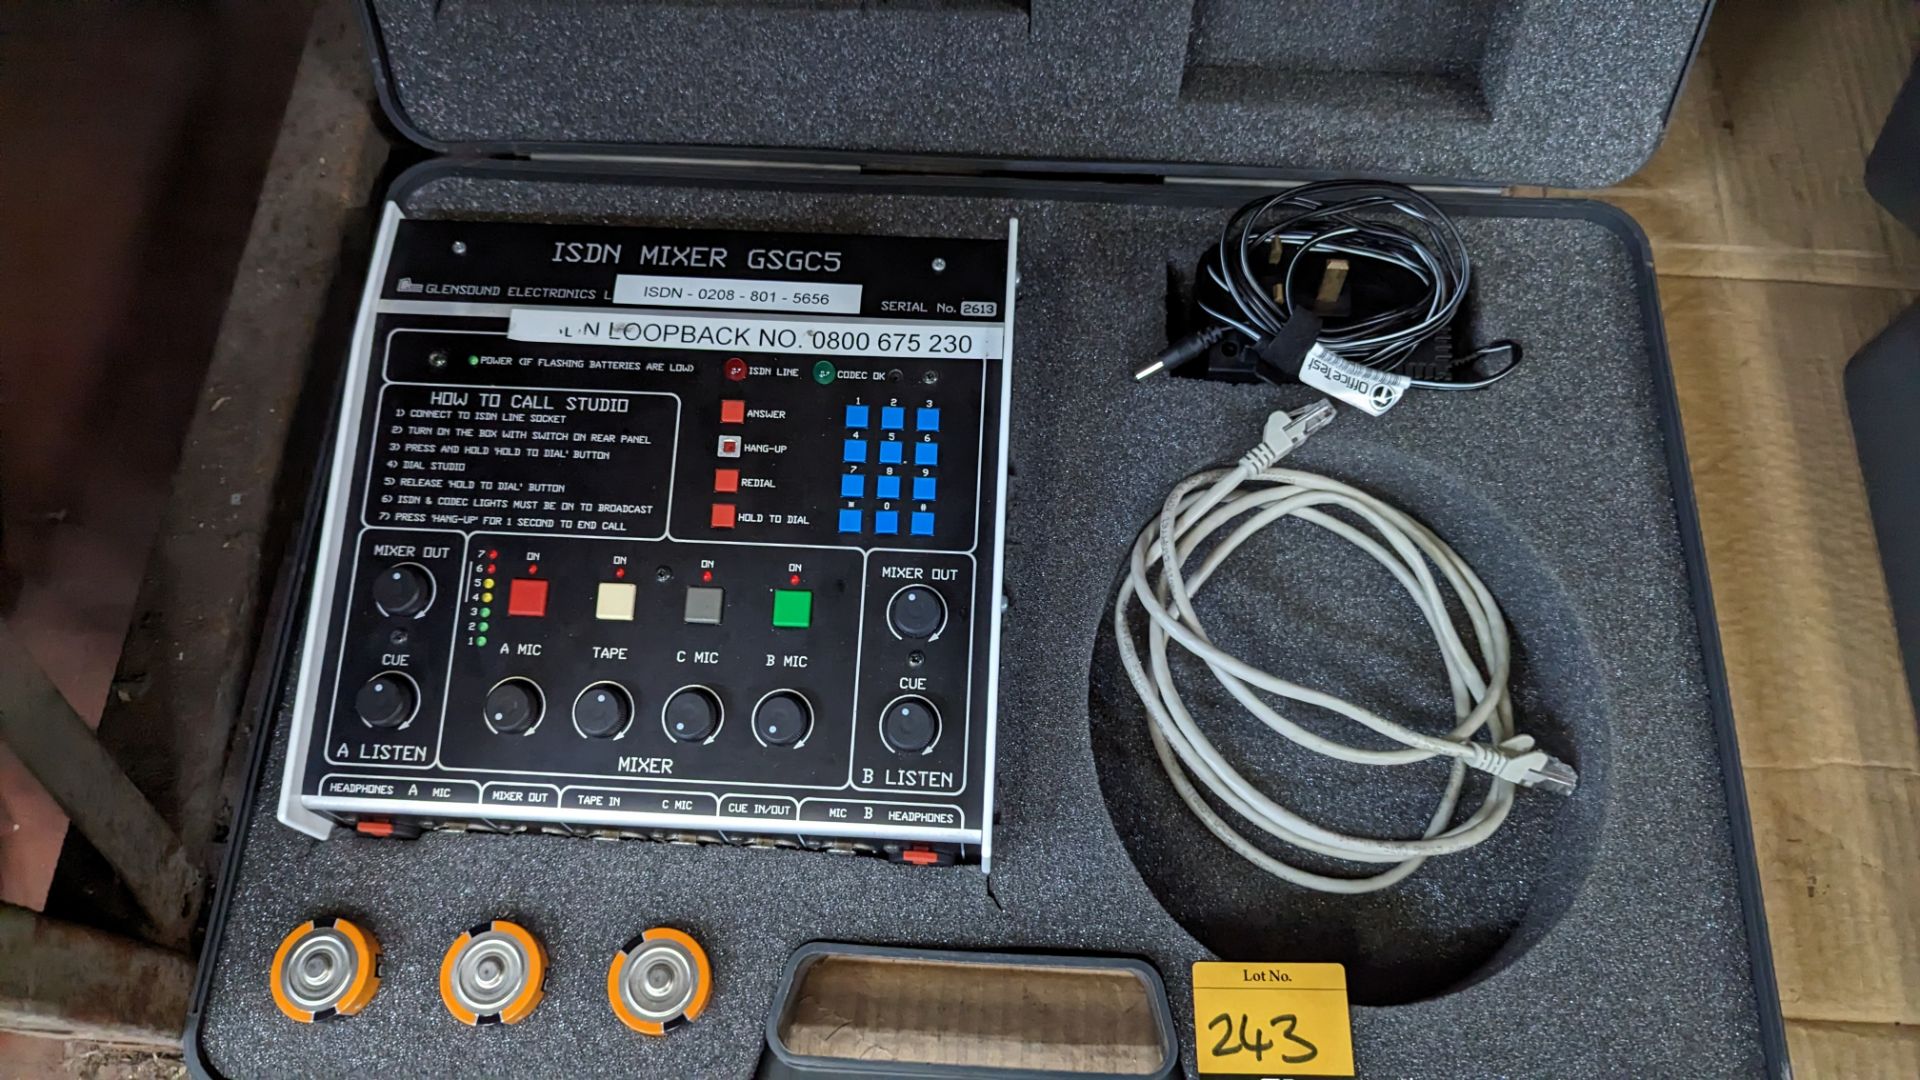 Glensound ISDN mixer, model GSGC5. Includes carry case and ancillaries - Image 4 of 9